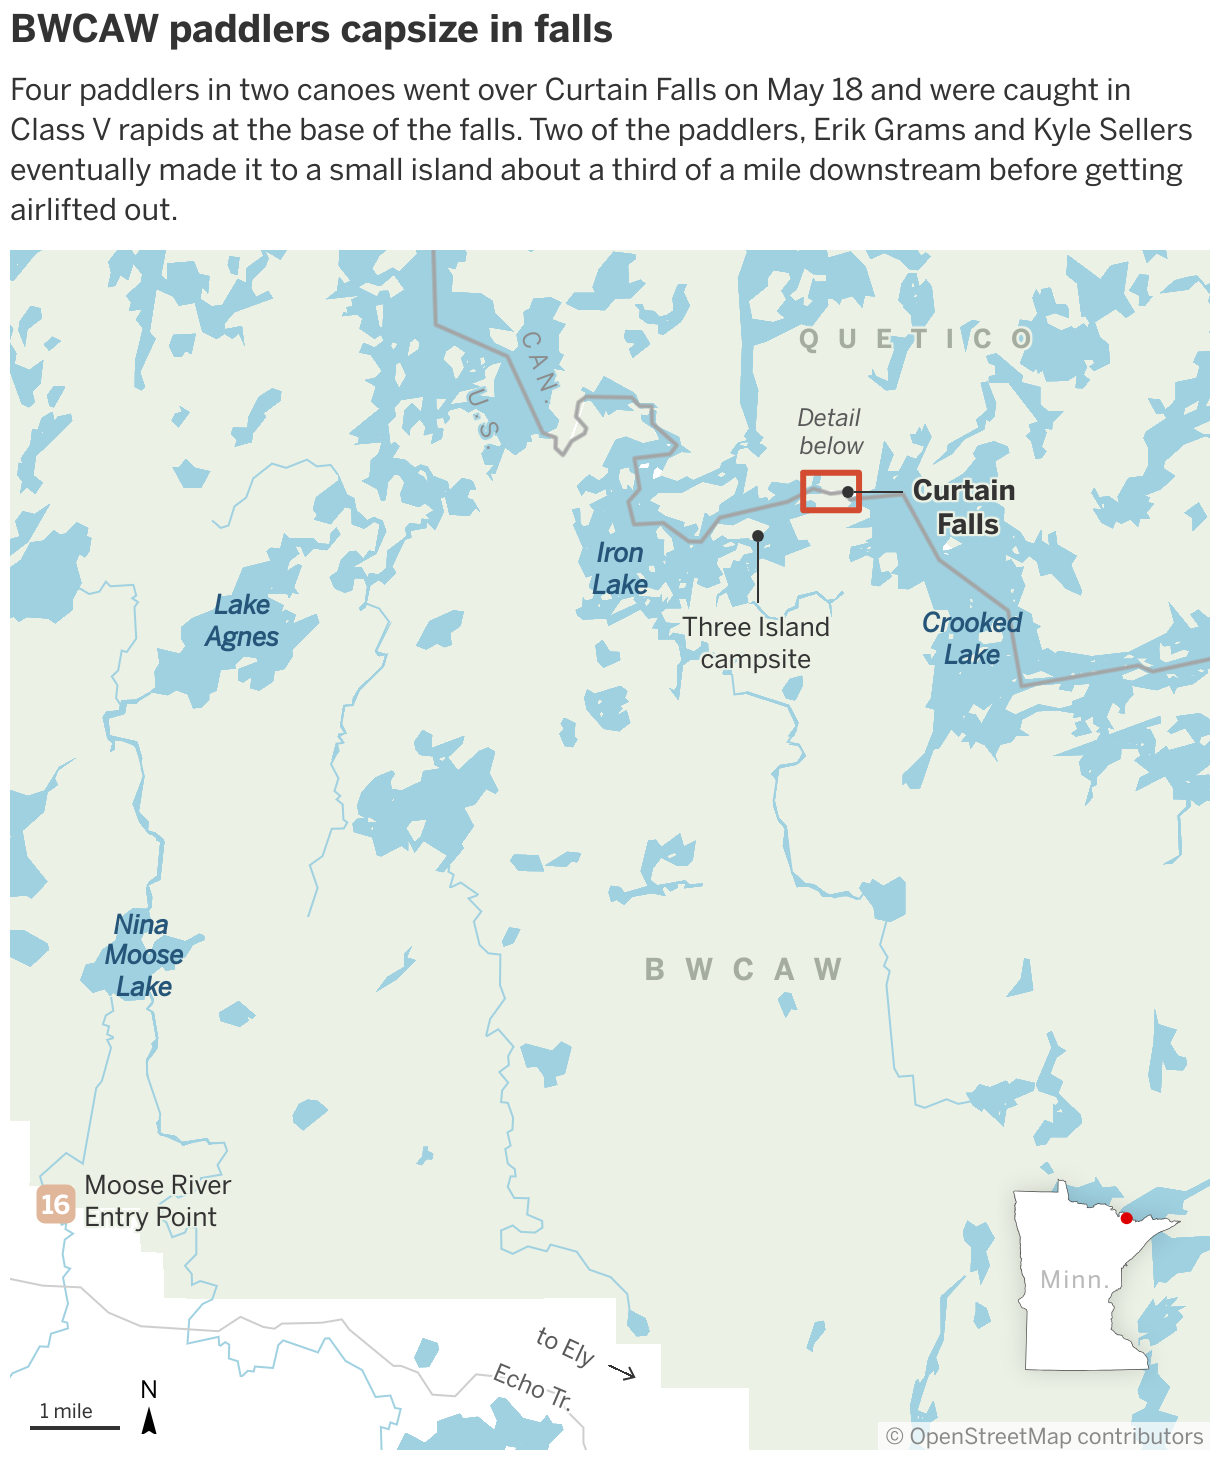 A map of northern Minnesota shows the area that the four canoeists traveled from the Moose River entry point to the Boundary Waters up to Iron Lake and eventually to Curtain Falls.